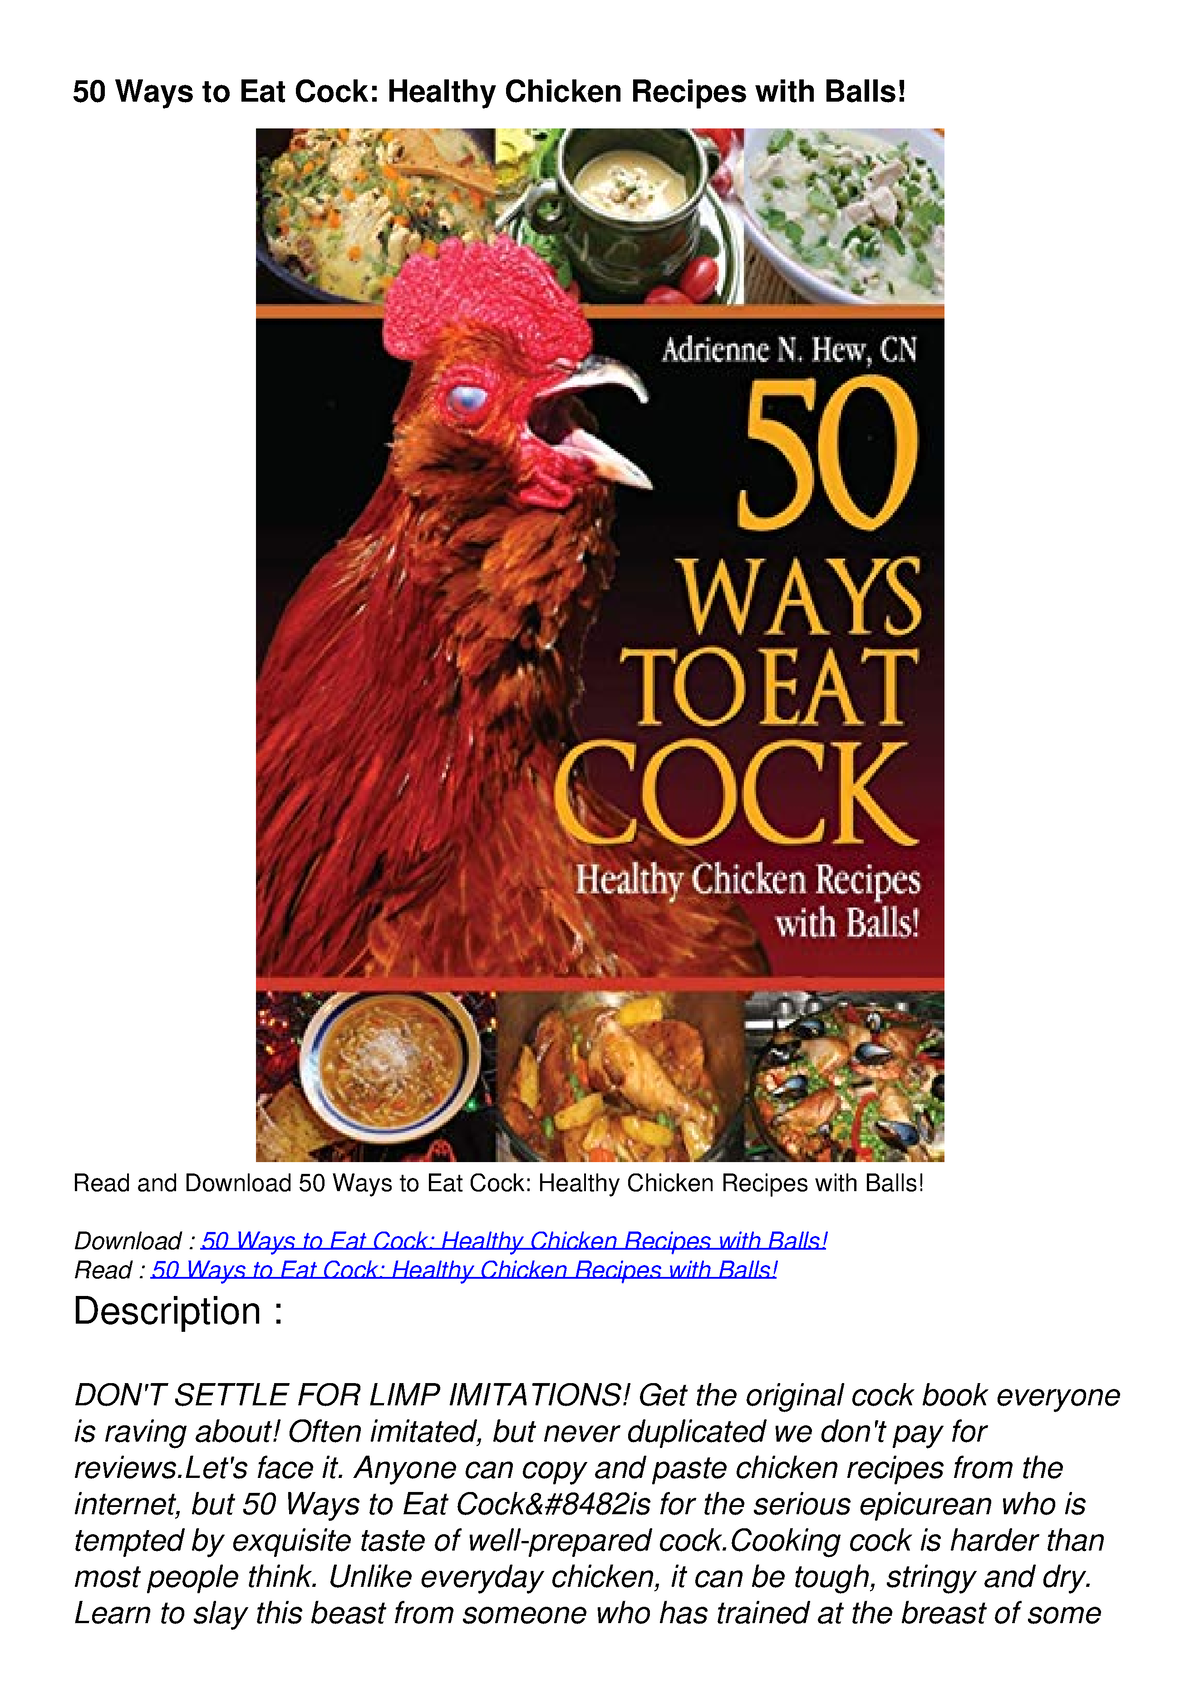 50 Ways To Eat Cock READ 50 Ways to Eat Cock: Healthy Chicken Recipes with Balls! ONLINE BOOK - 50  Ways to Eat Cock: - Studocu